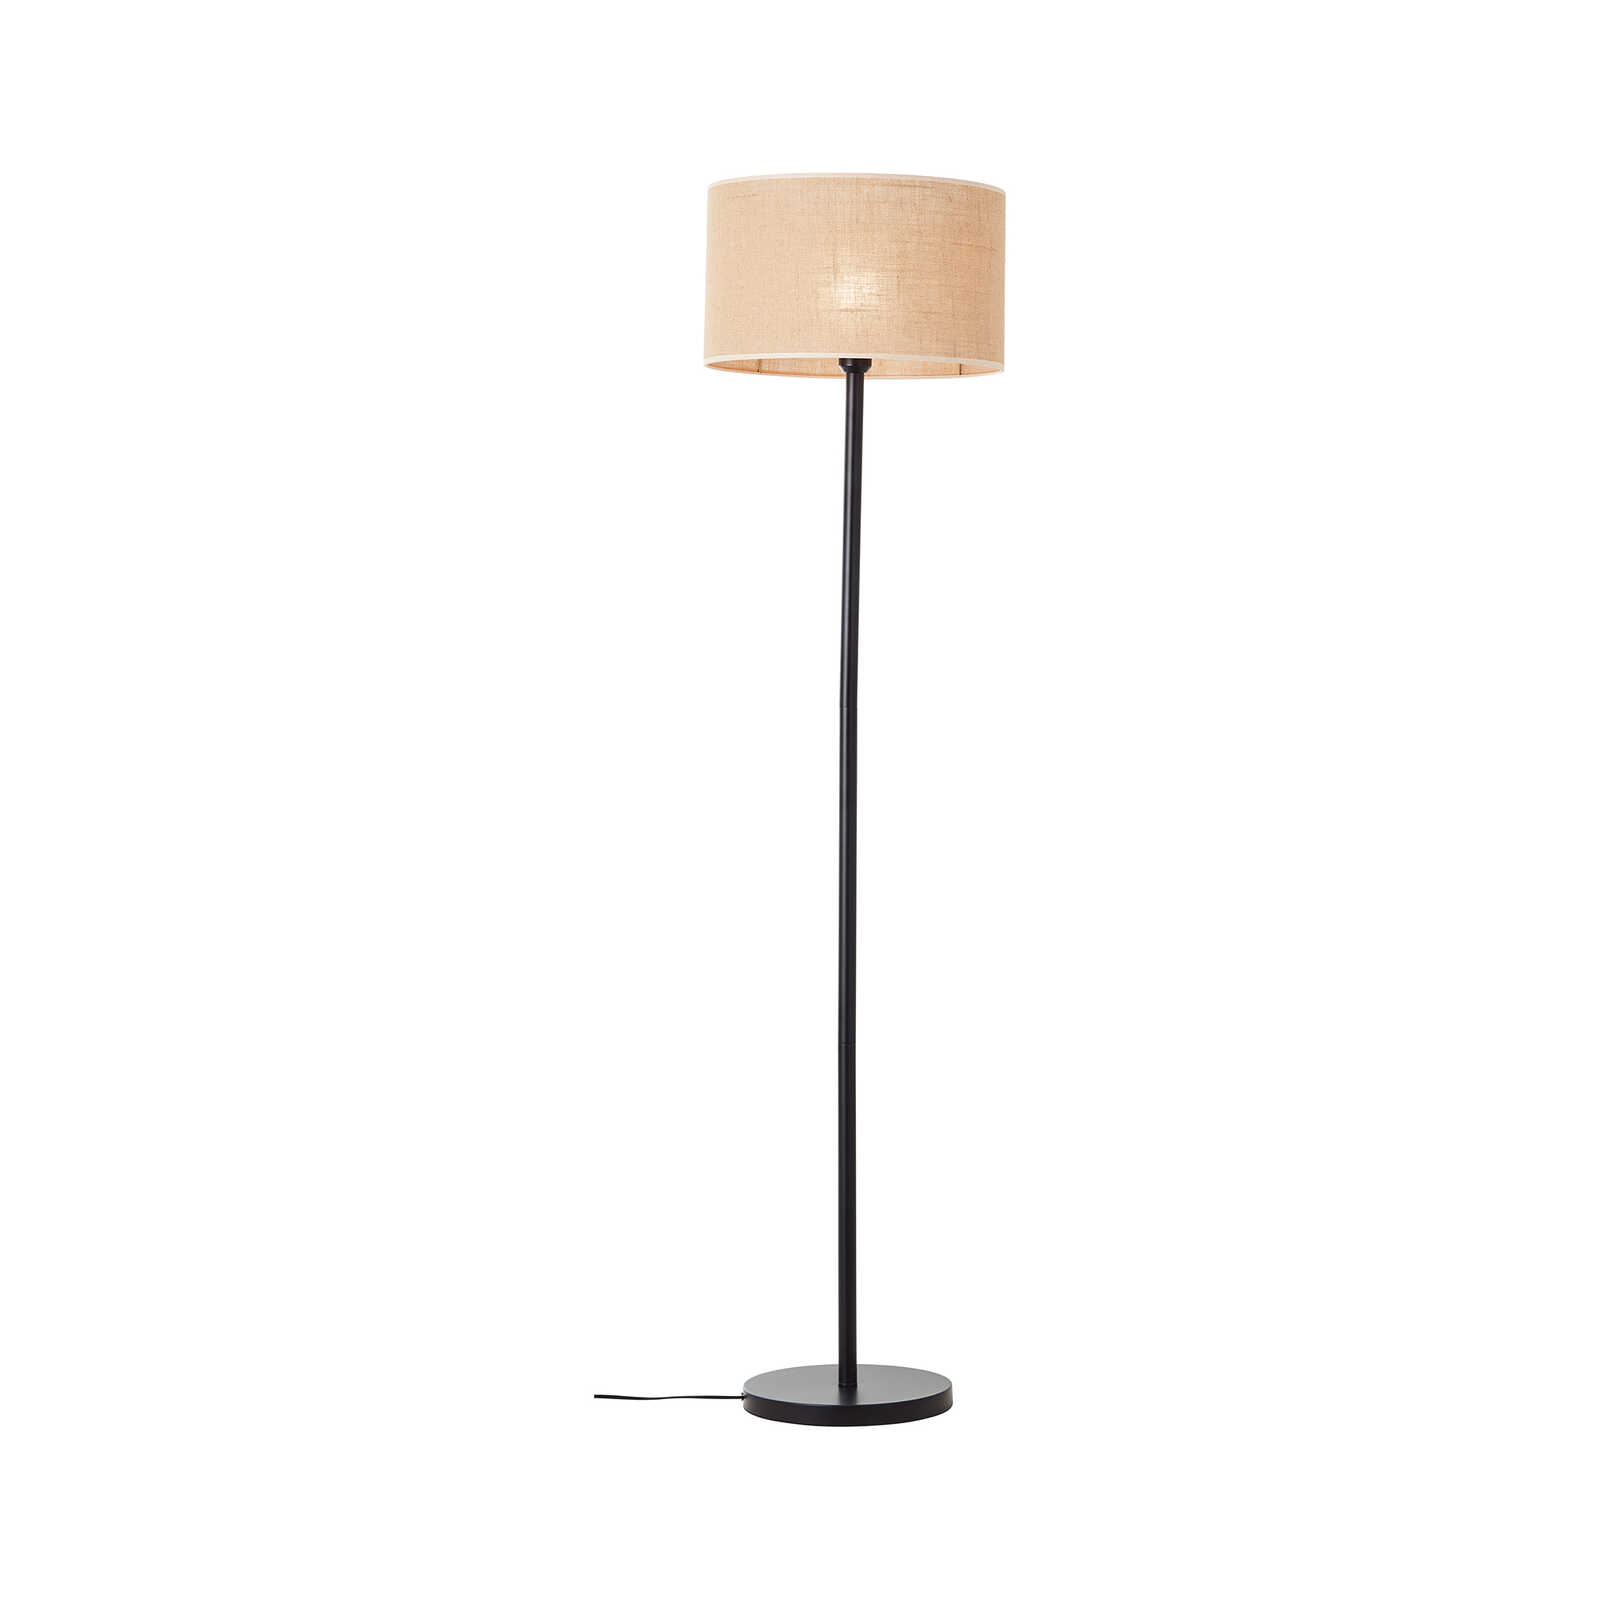 Floor lamp made of textile - Alicia 4 - Brown
